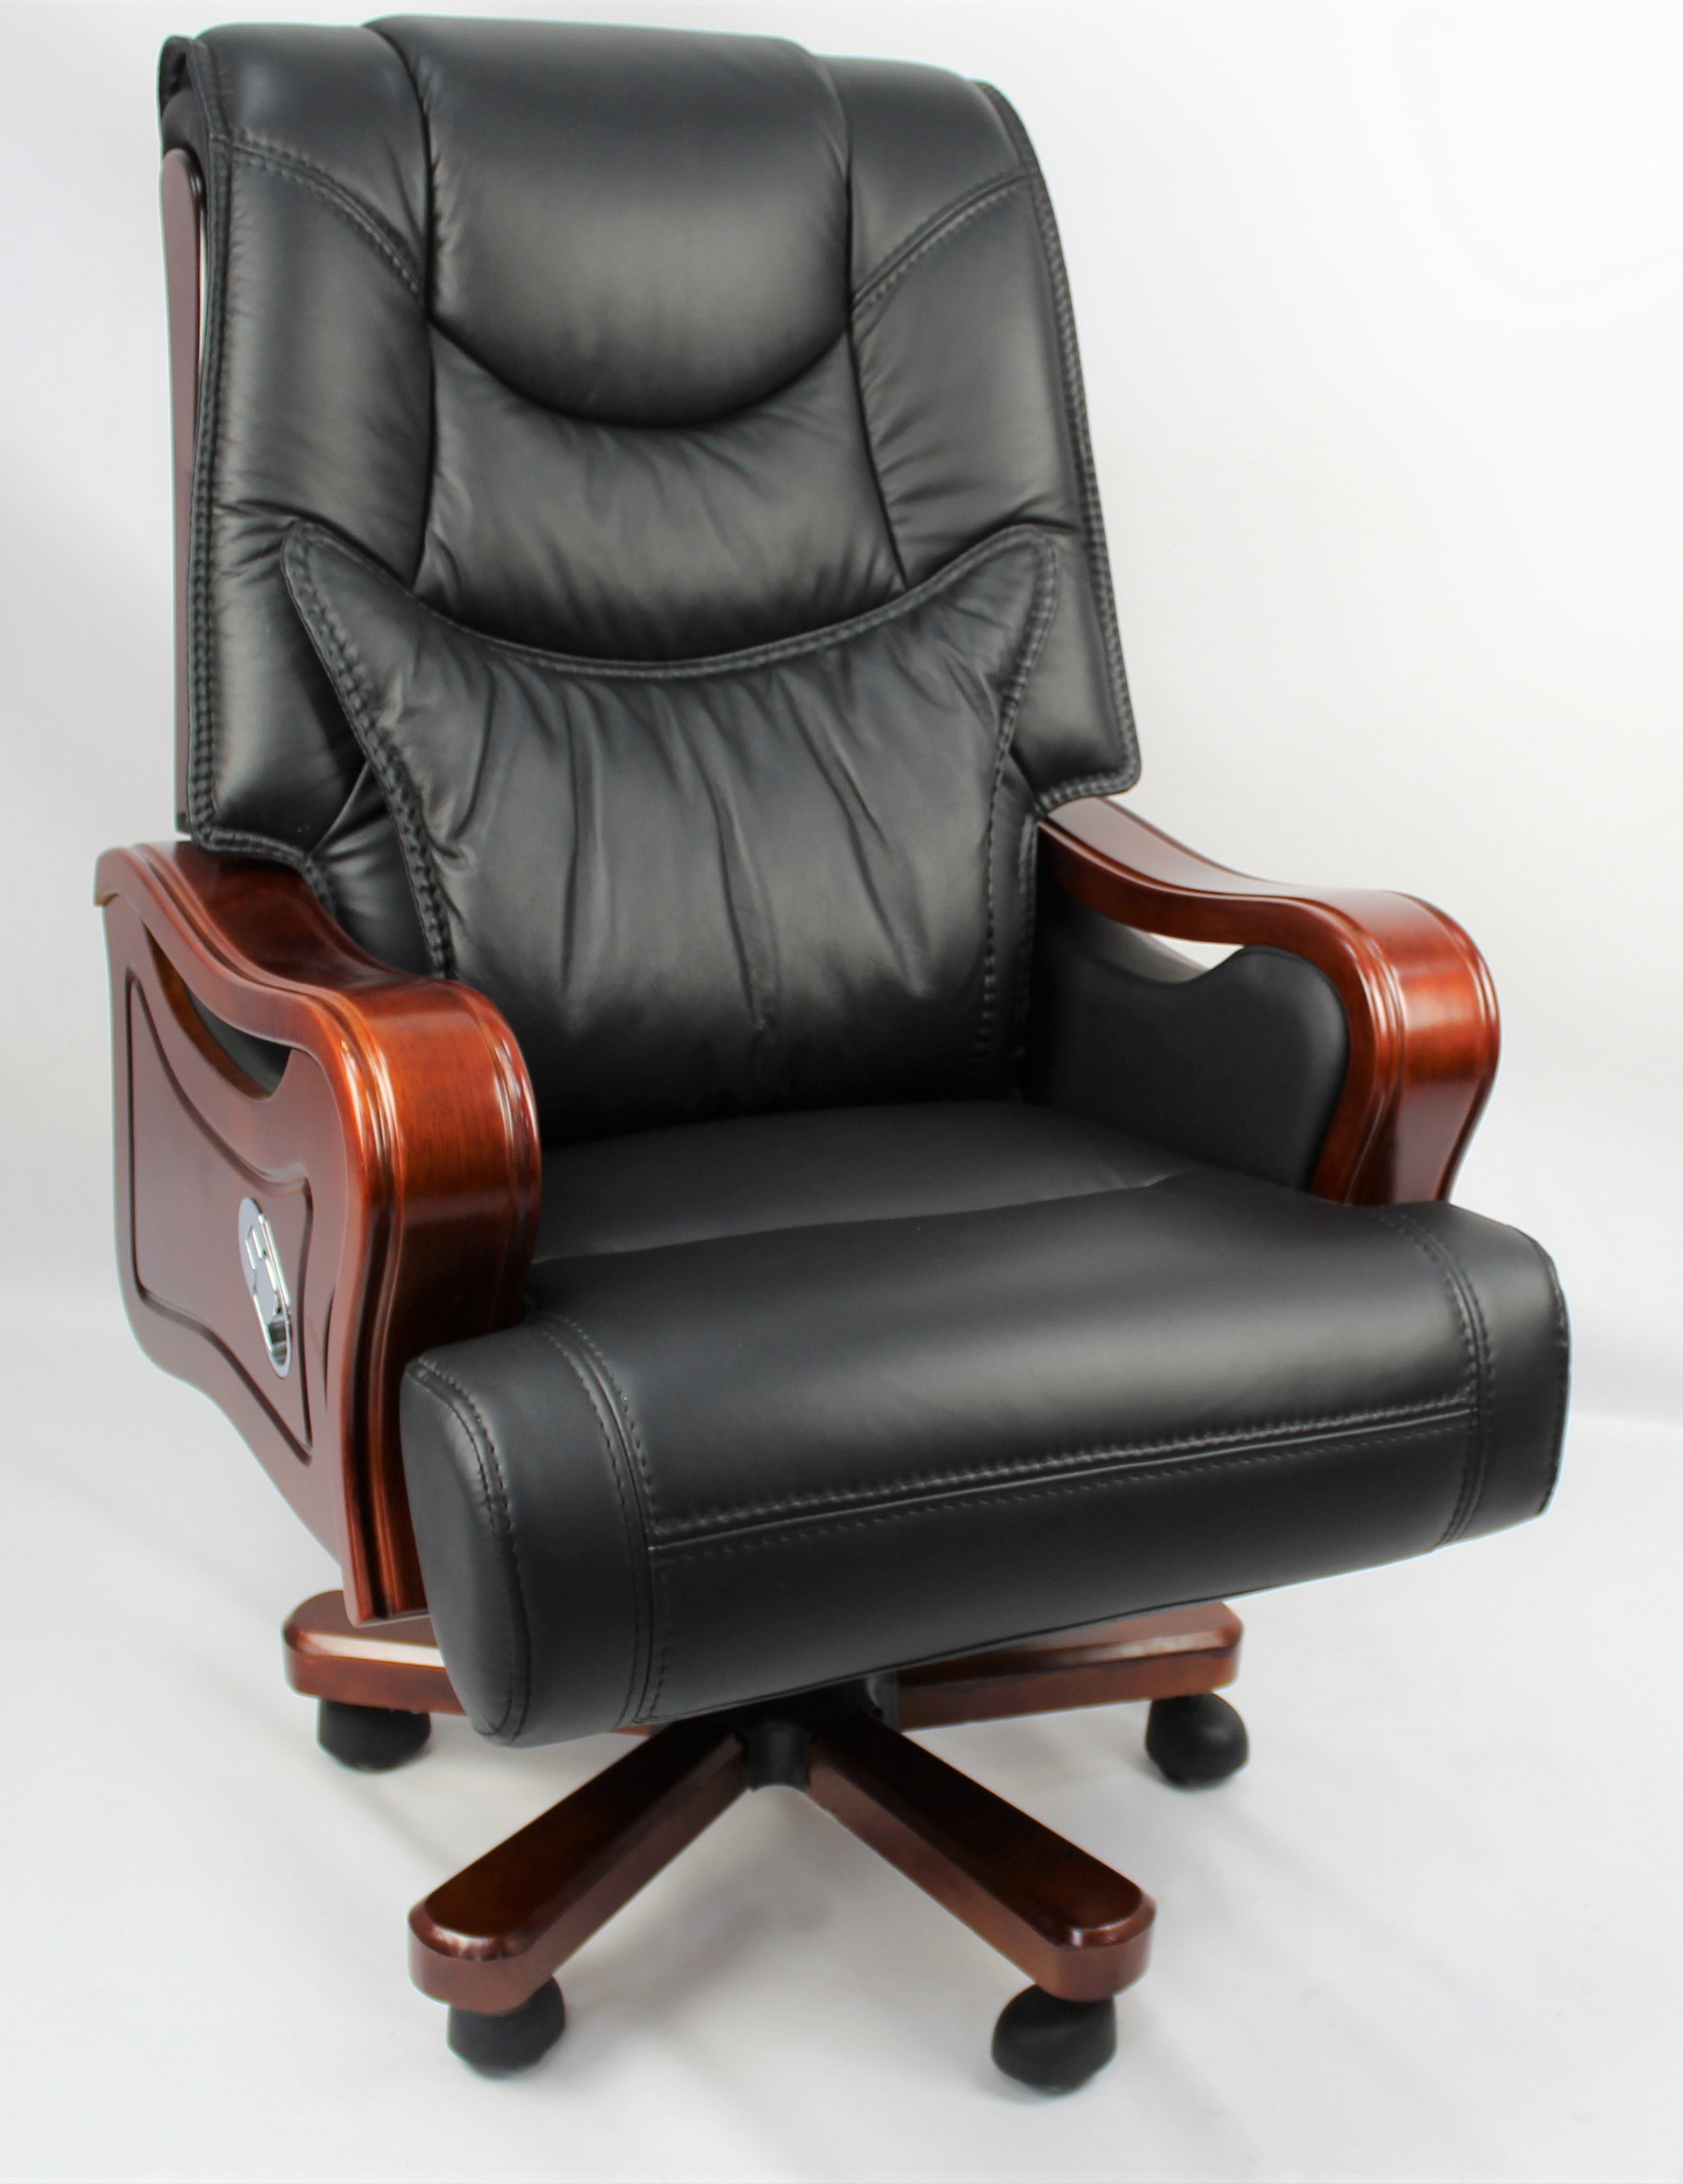 Large Executive Black Leather Office Chair with Wooden Arms - SZ-A768 Huddersfield